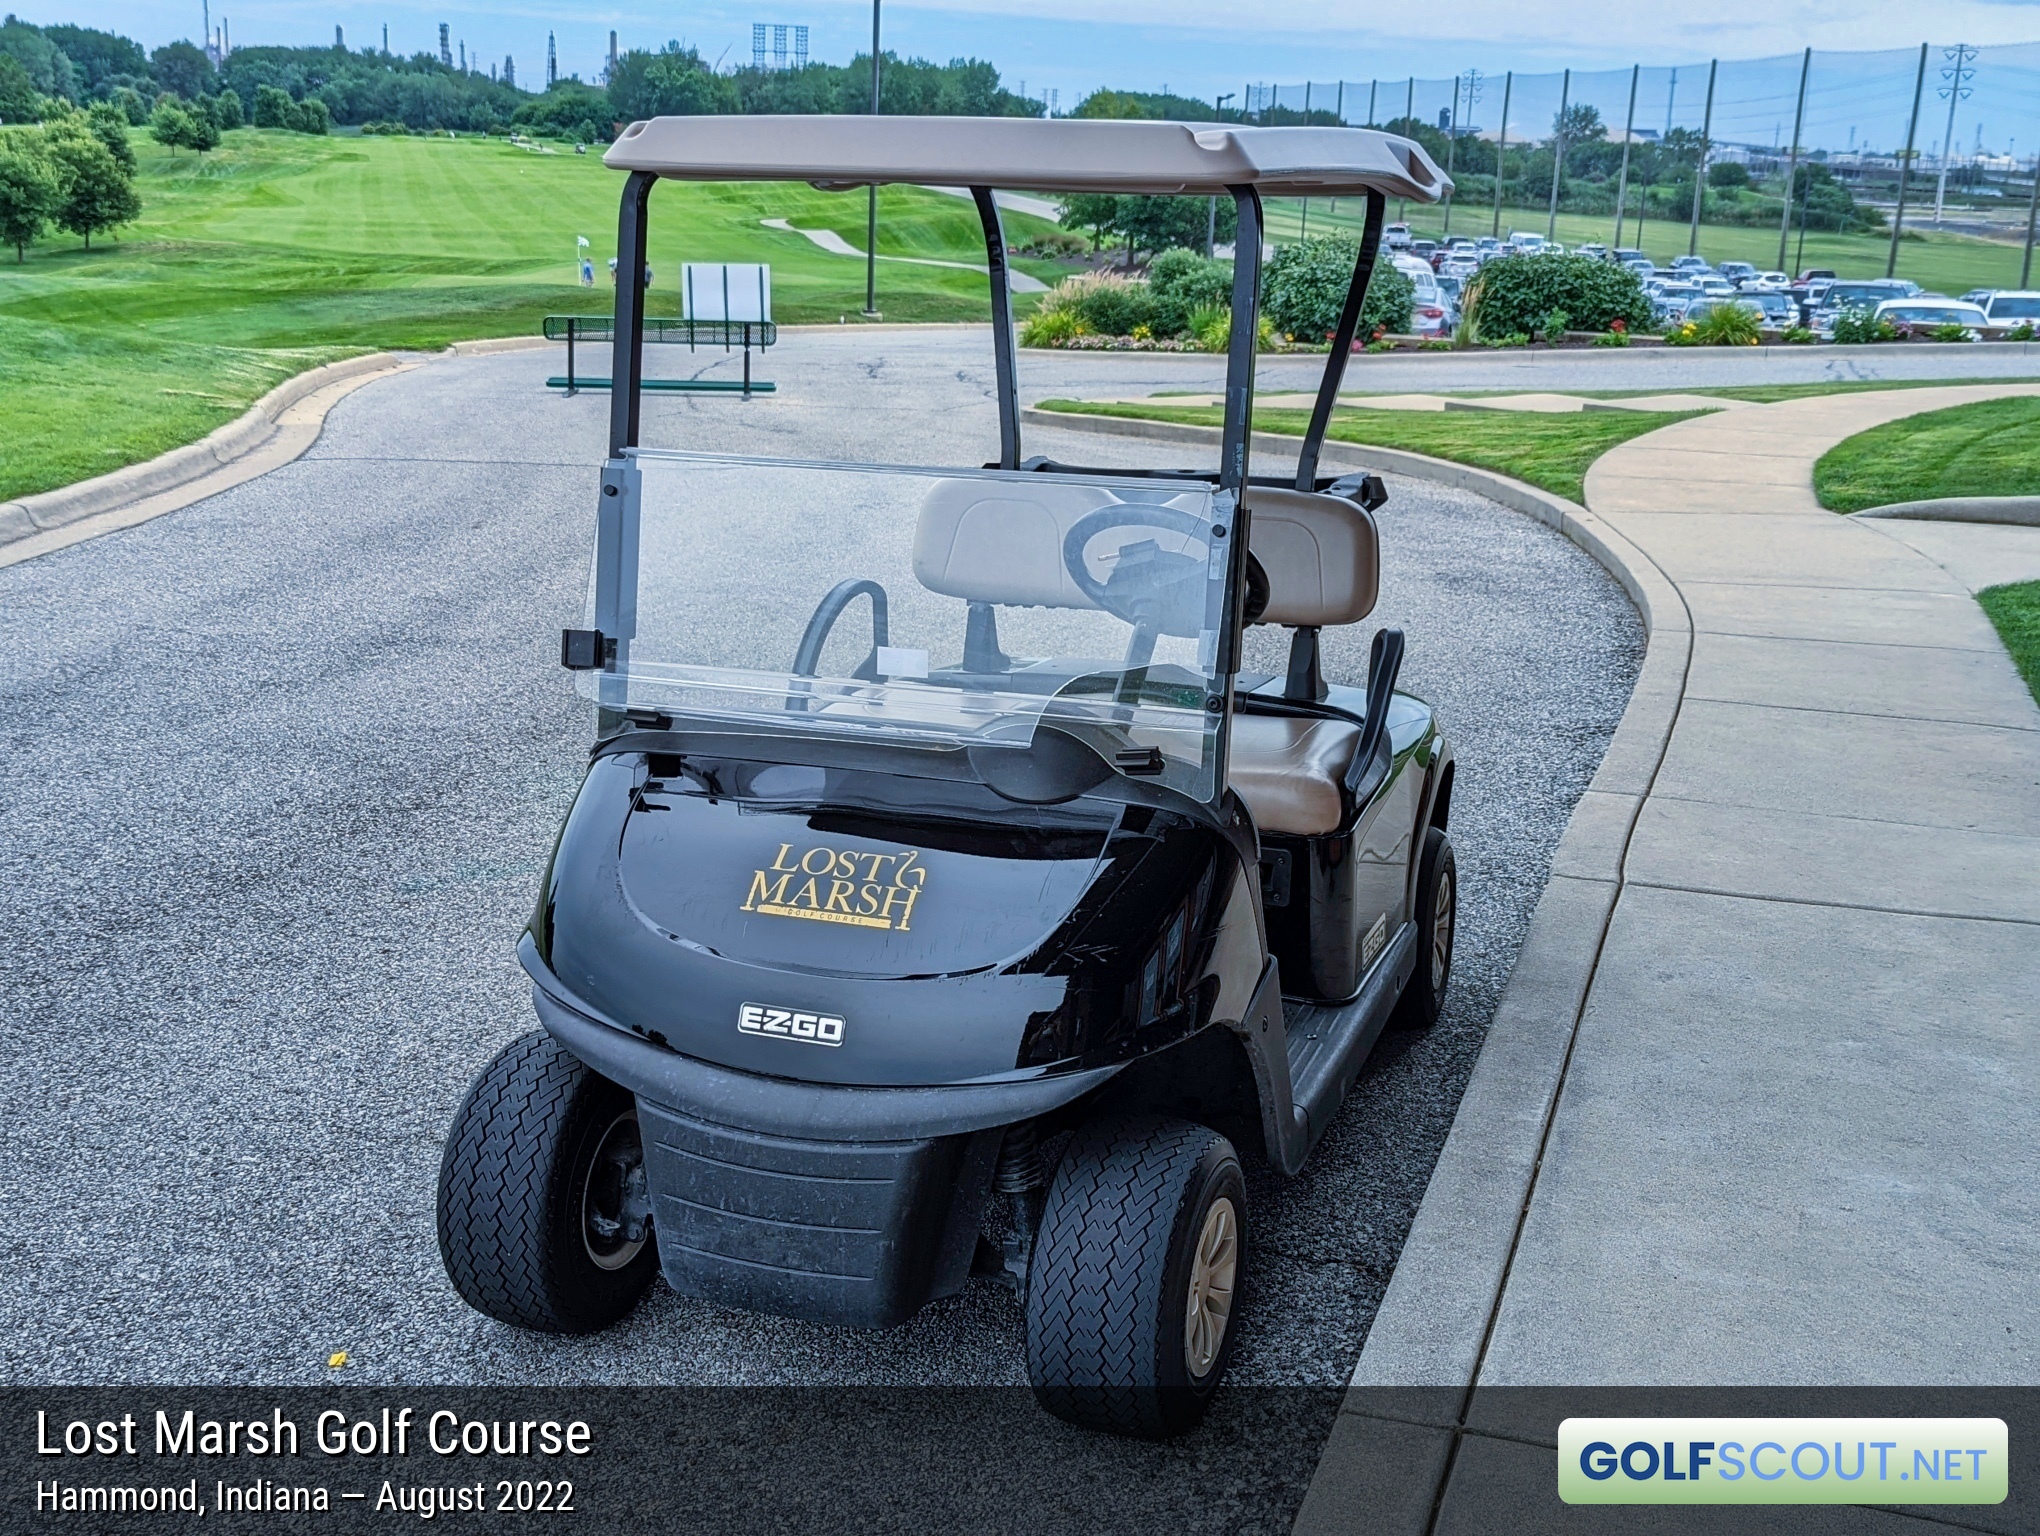 Photo of the golf carts at Lost Marsh Golf Course in Hammond, Indiana. 